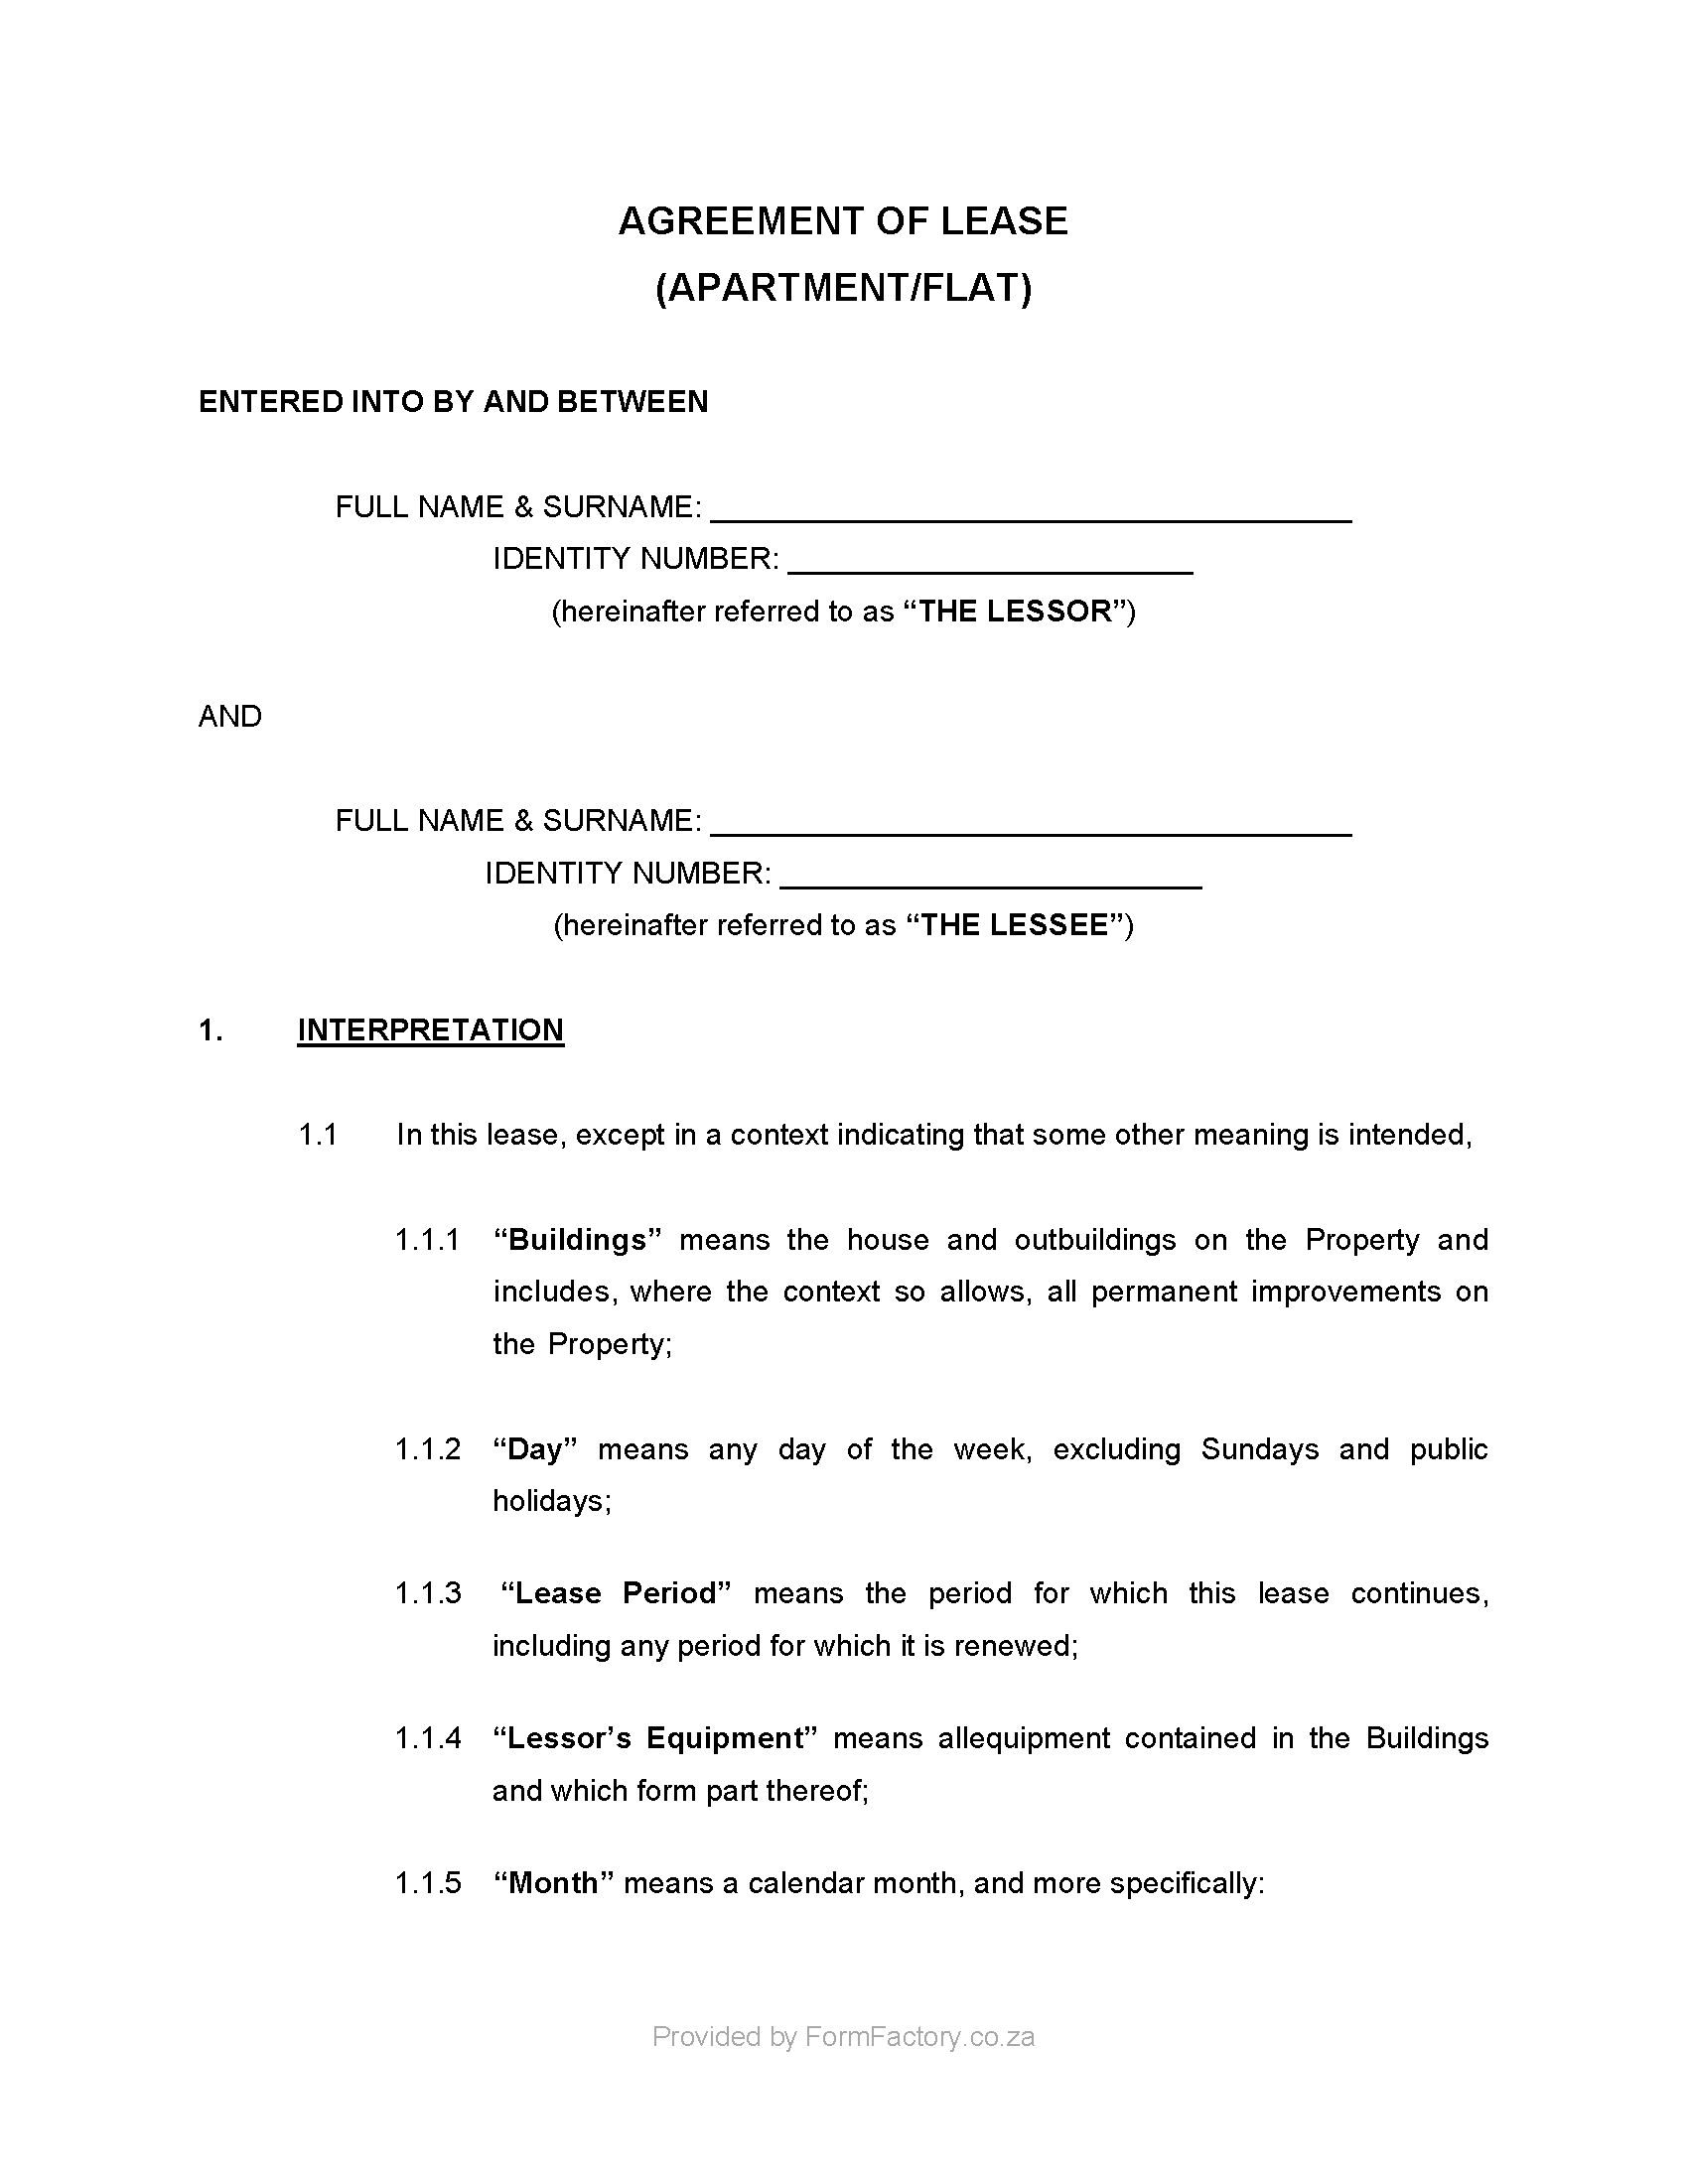 Download Residential Lease Agreement Template - Formfactory Calendar Month Notice South Africa